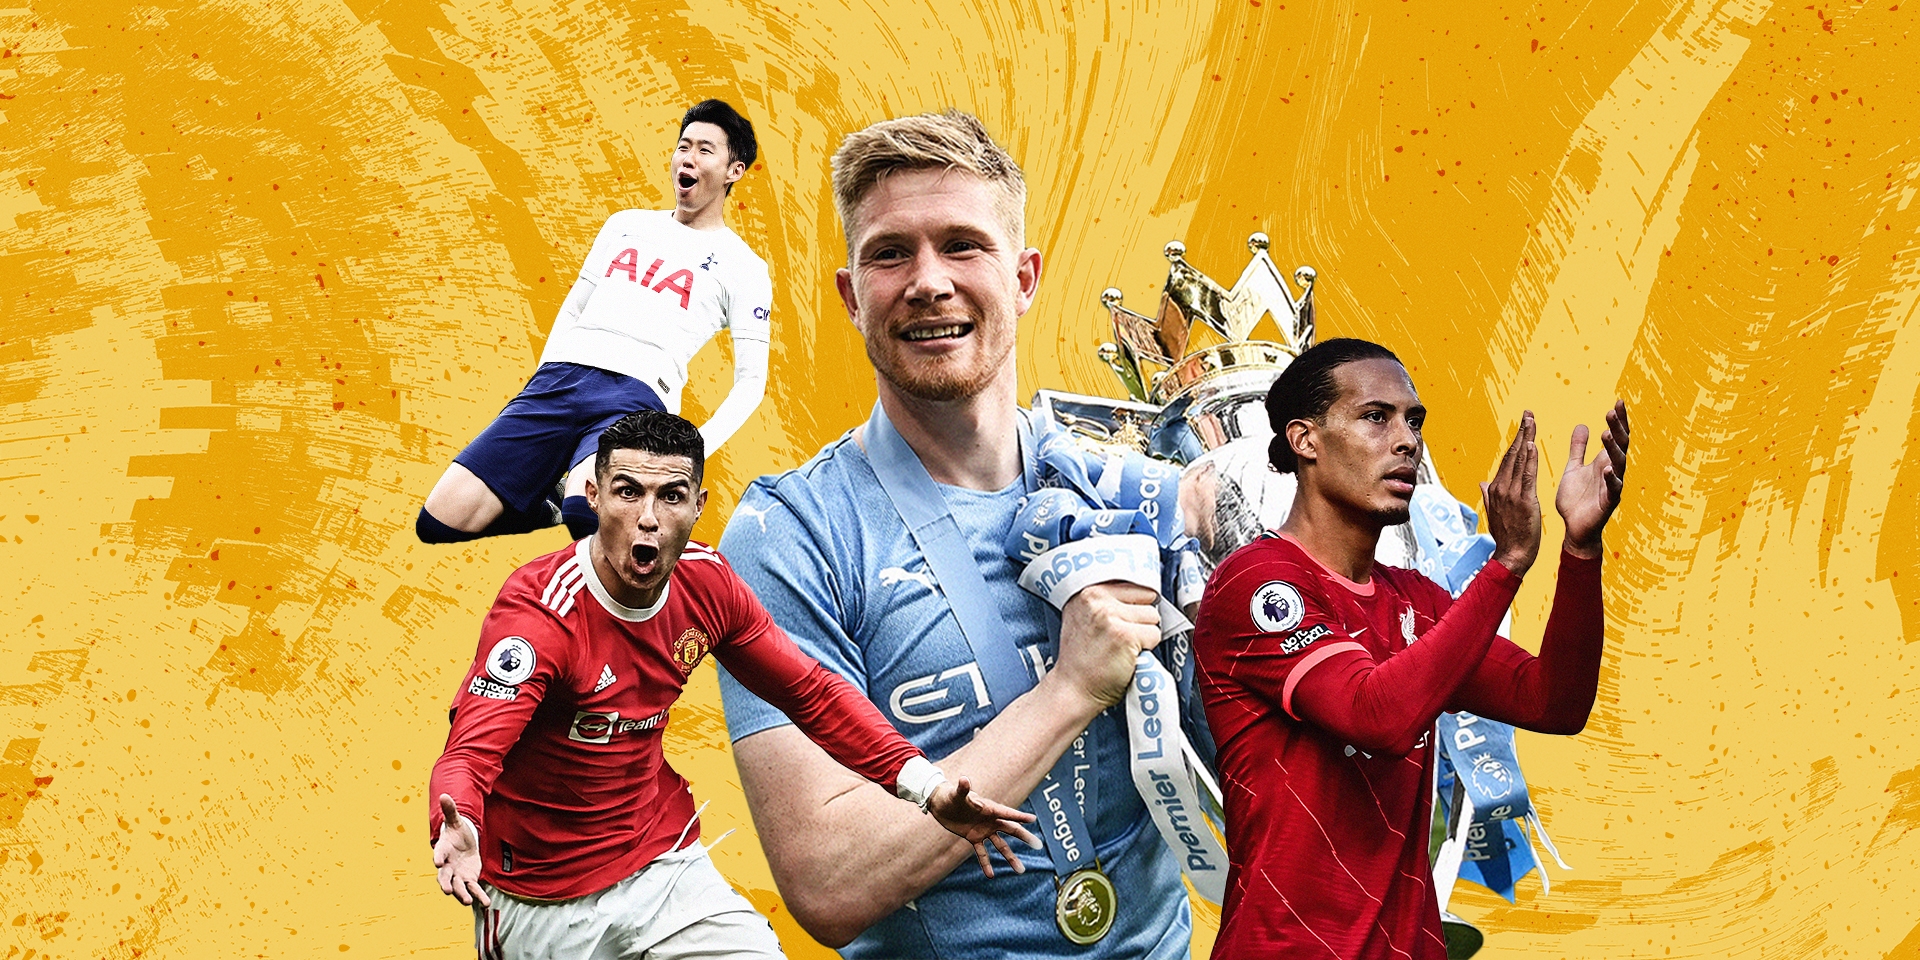 2022/23 Premier League Predictions + five things to watch